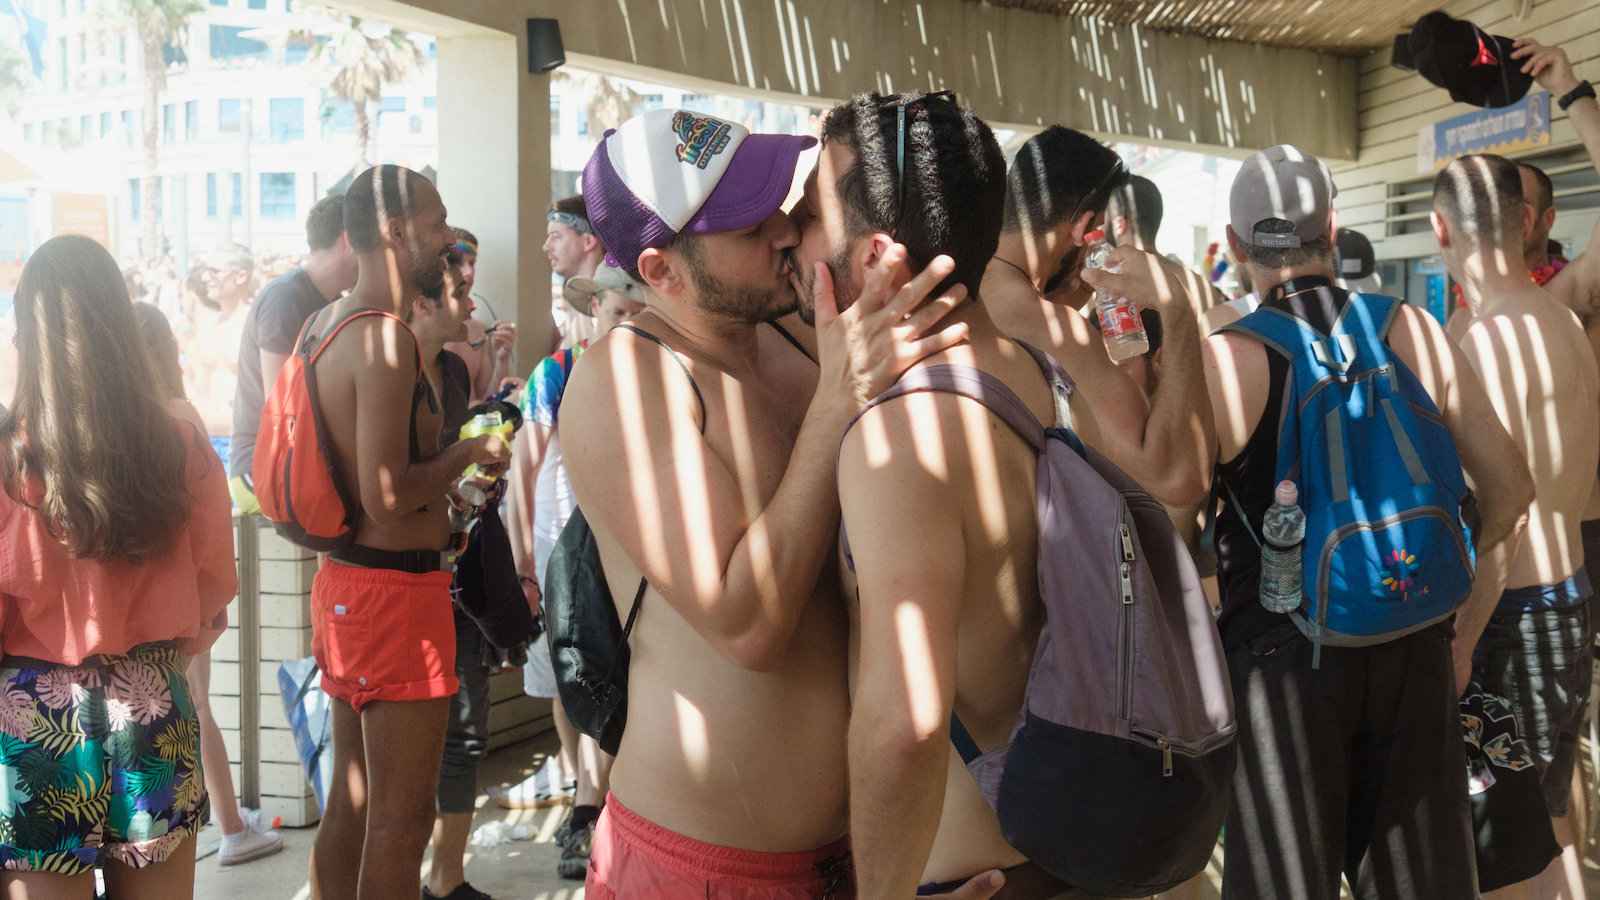 At Riviera Maya gay events and spaces you can be completely free to be gay